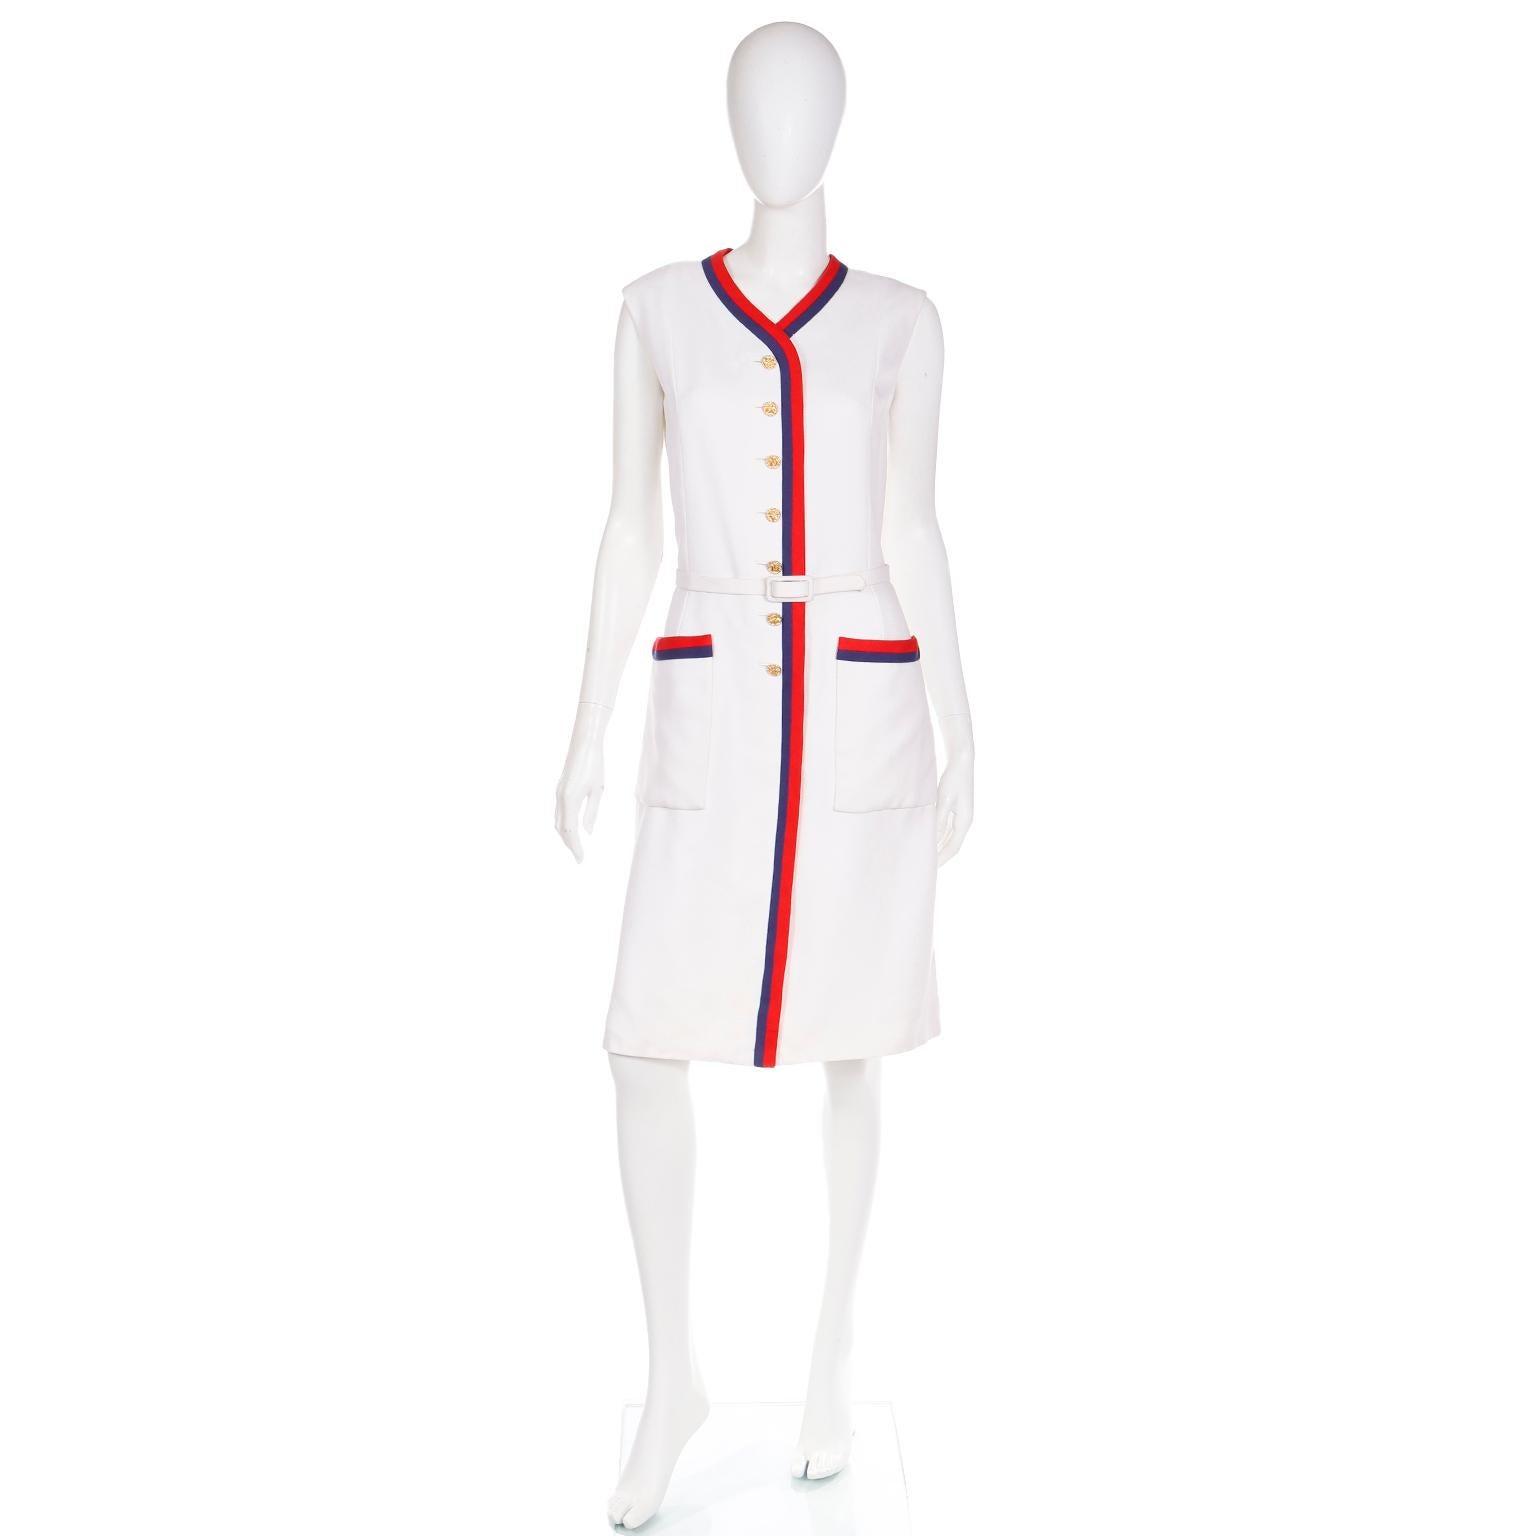 We love vintage Harvey Berin dresses designed by Karen Stark and this one is well made down to every detail. This late 1960's Summer day dress is in a white textured linen like fabric and it is fully lined in an ivory silk. The red and navy blue